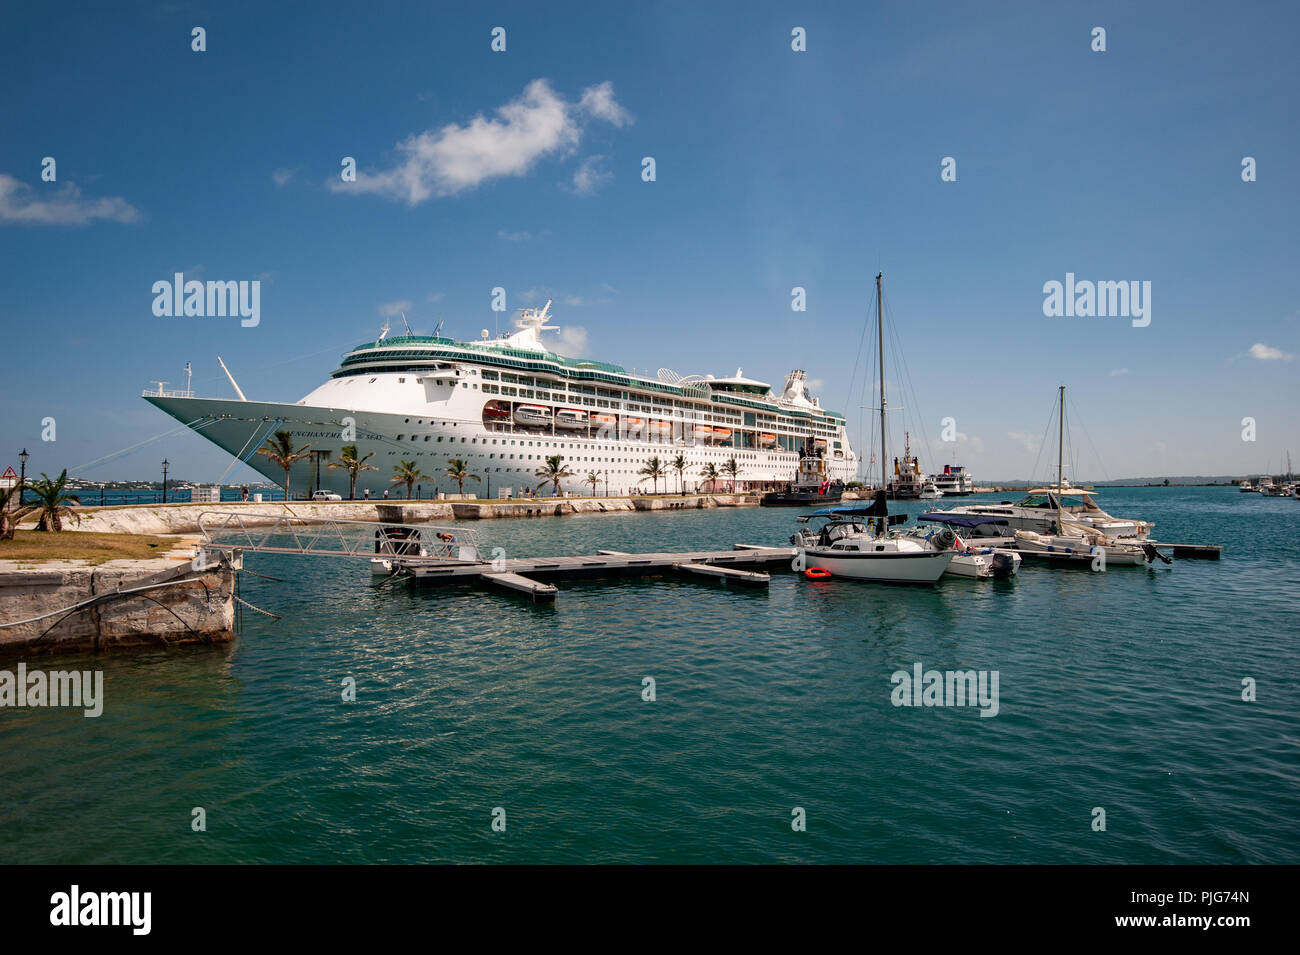 King's Wharf Bermuda - a Royal Caribbean cruise ship is docked next to sailboats in the aquamarine waters of the Bermuda port of call Stock Photo